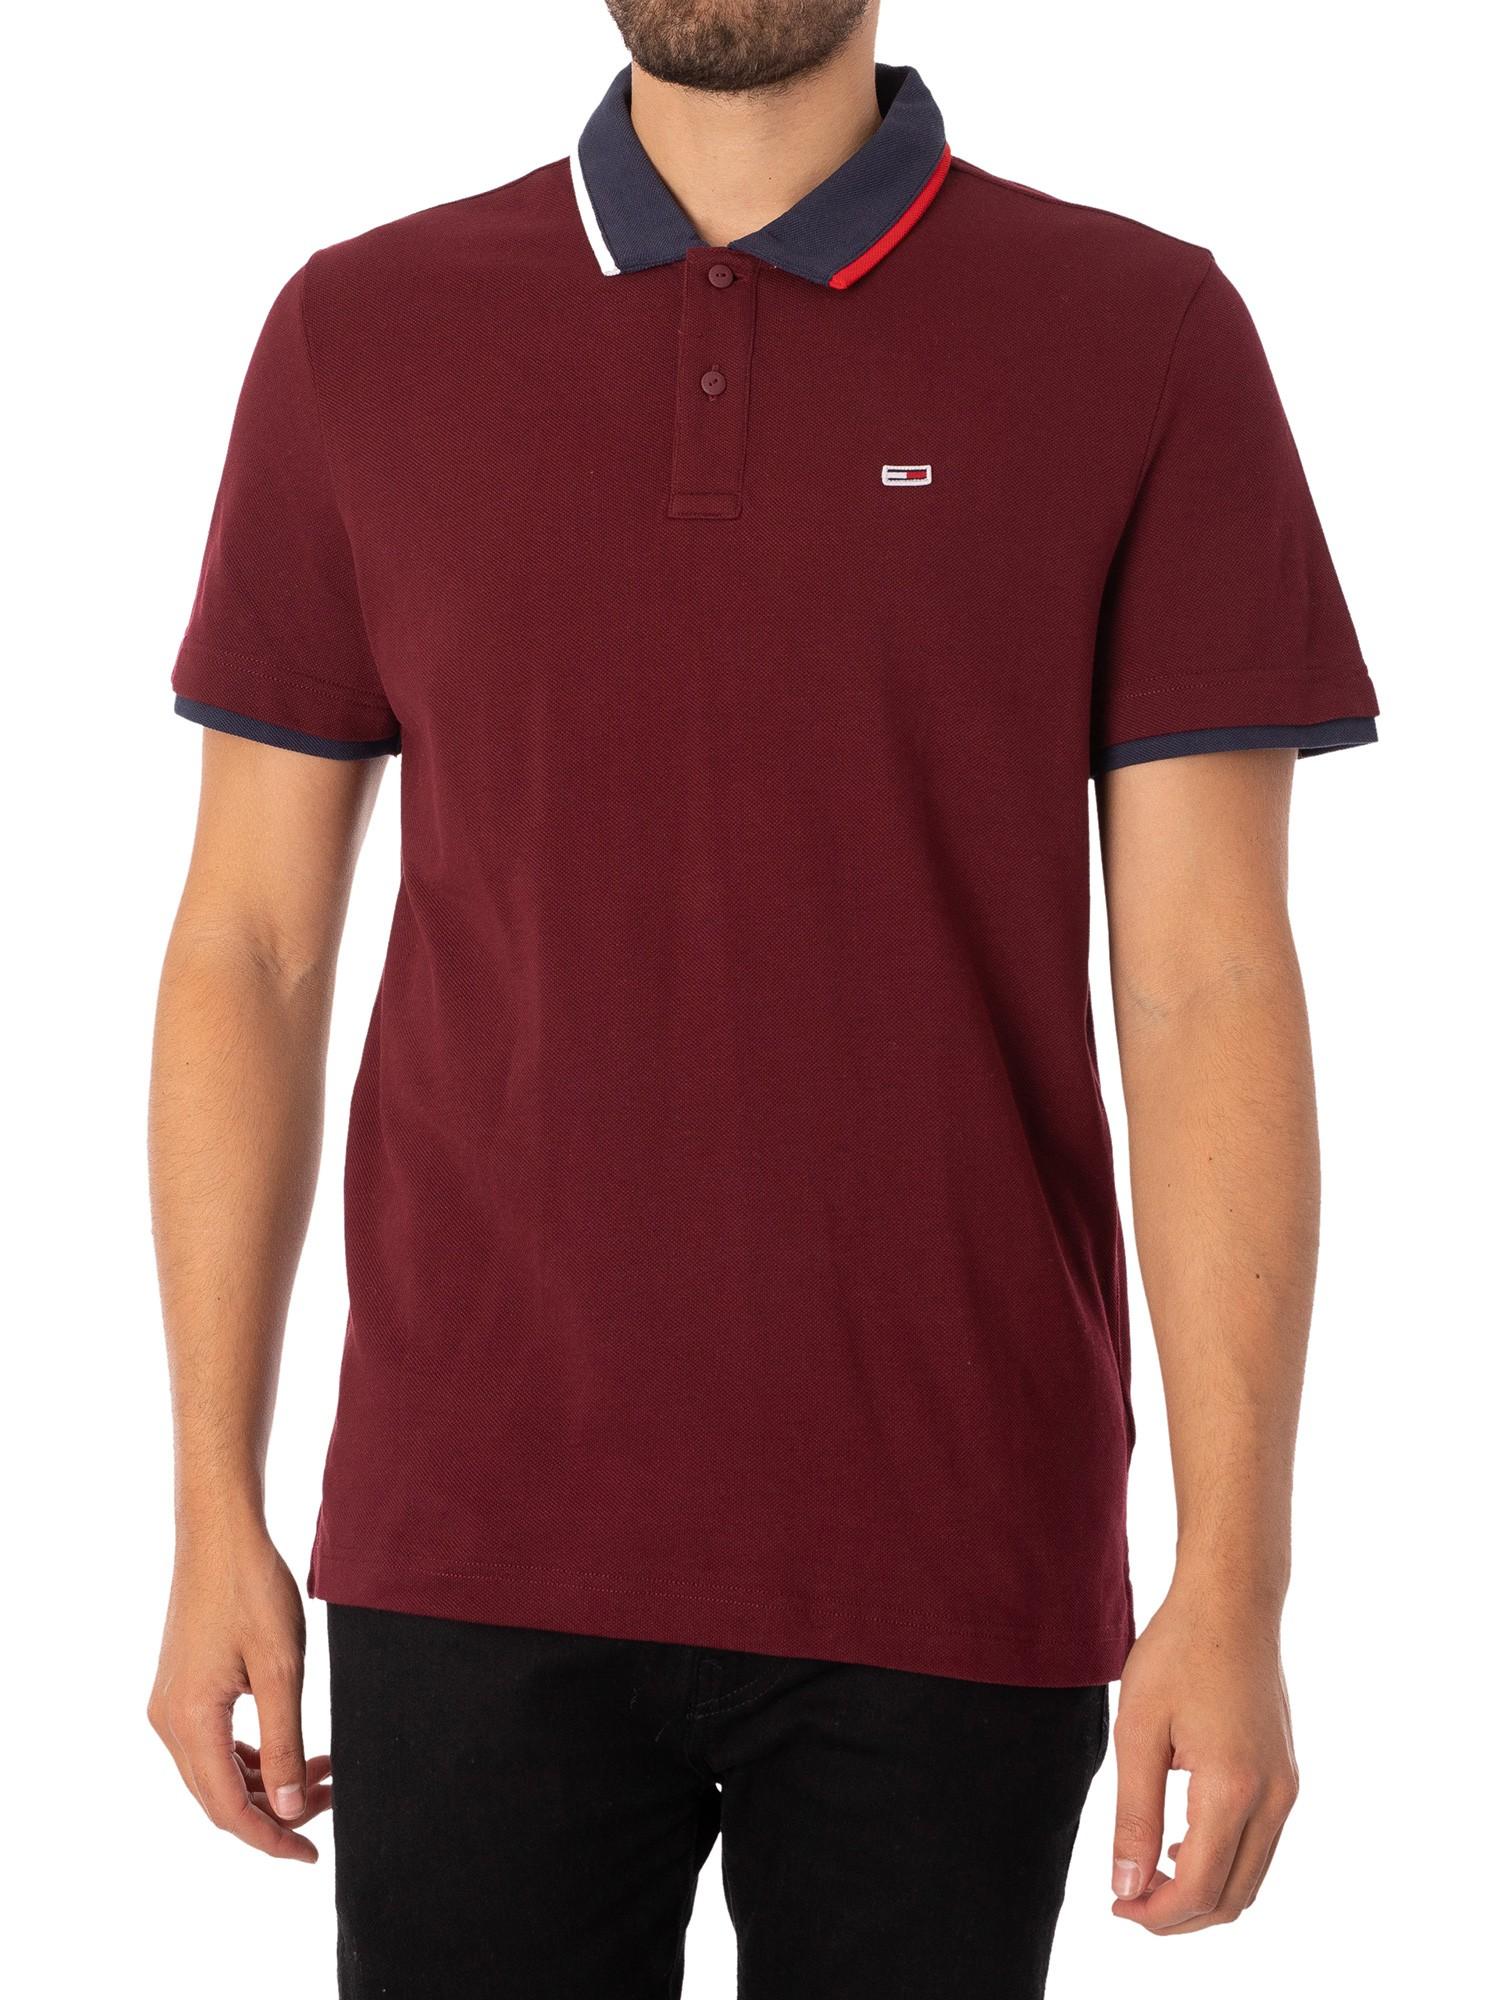 Tommy Hilfiger Flag Neck Polo Shirt in Red for Men | Lyst